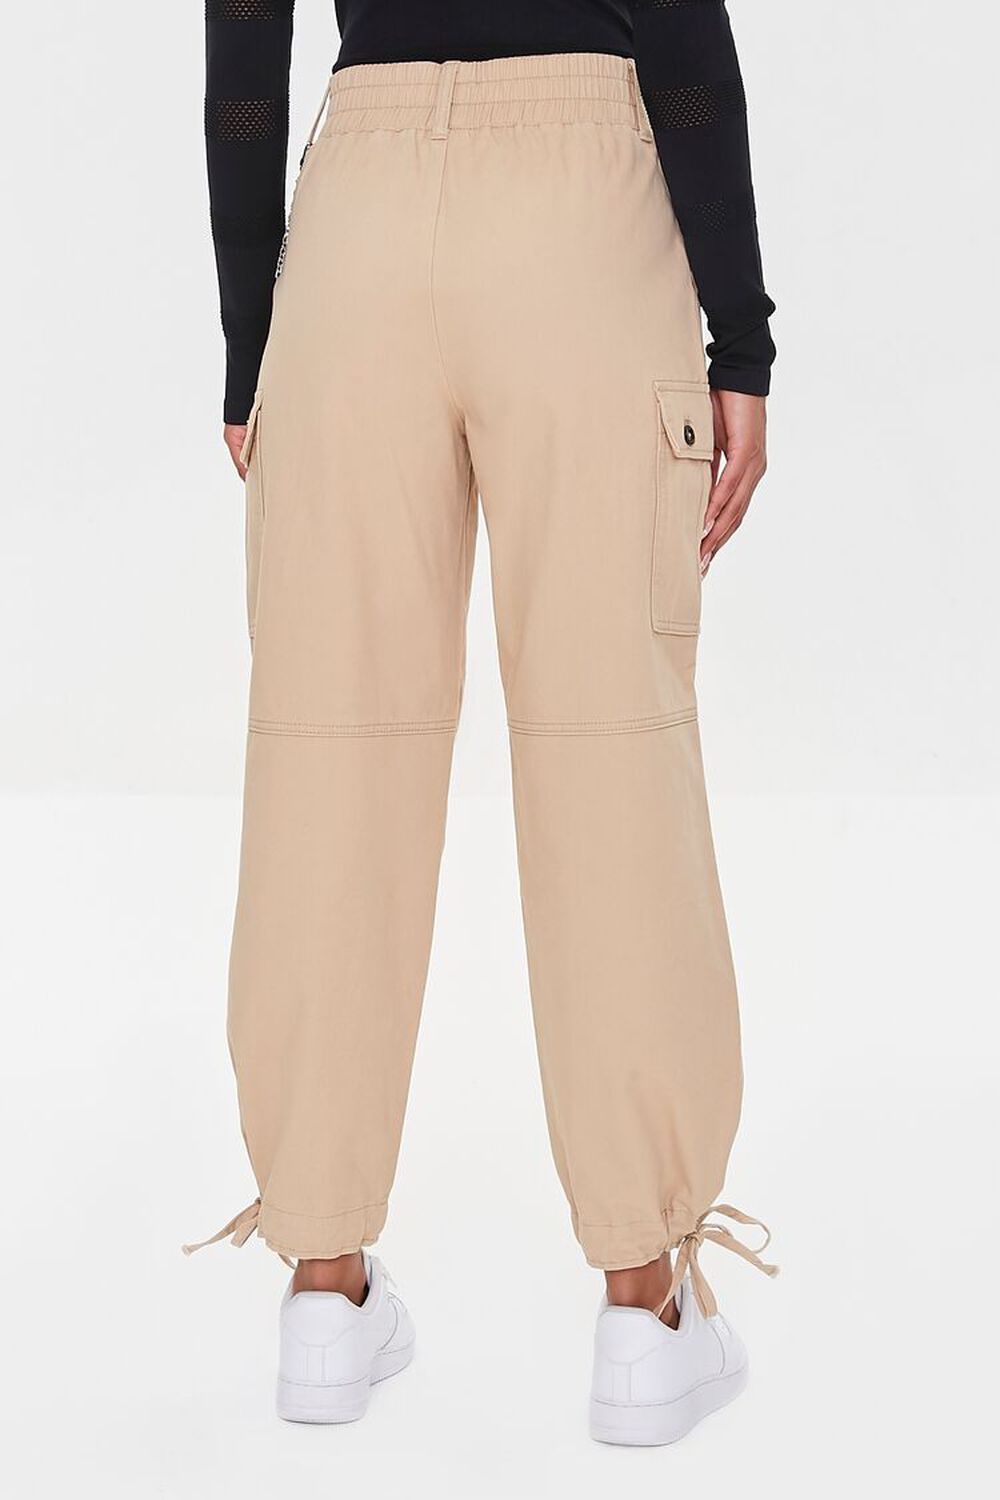 Wallet Chain Ankle Pants